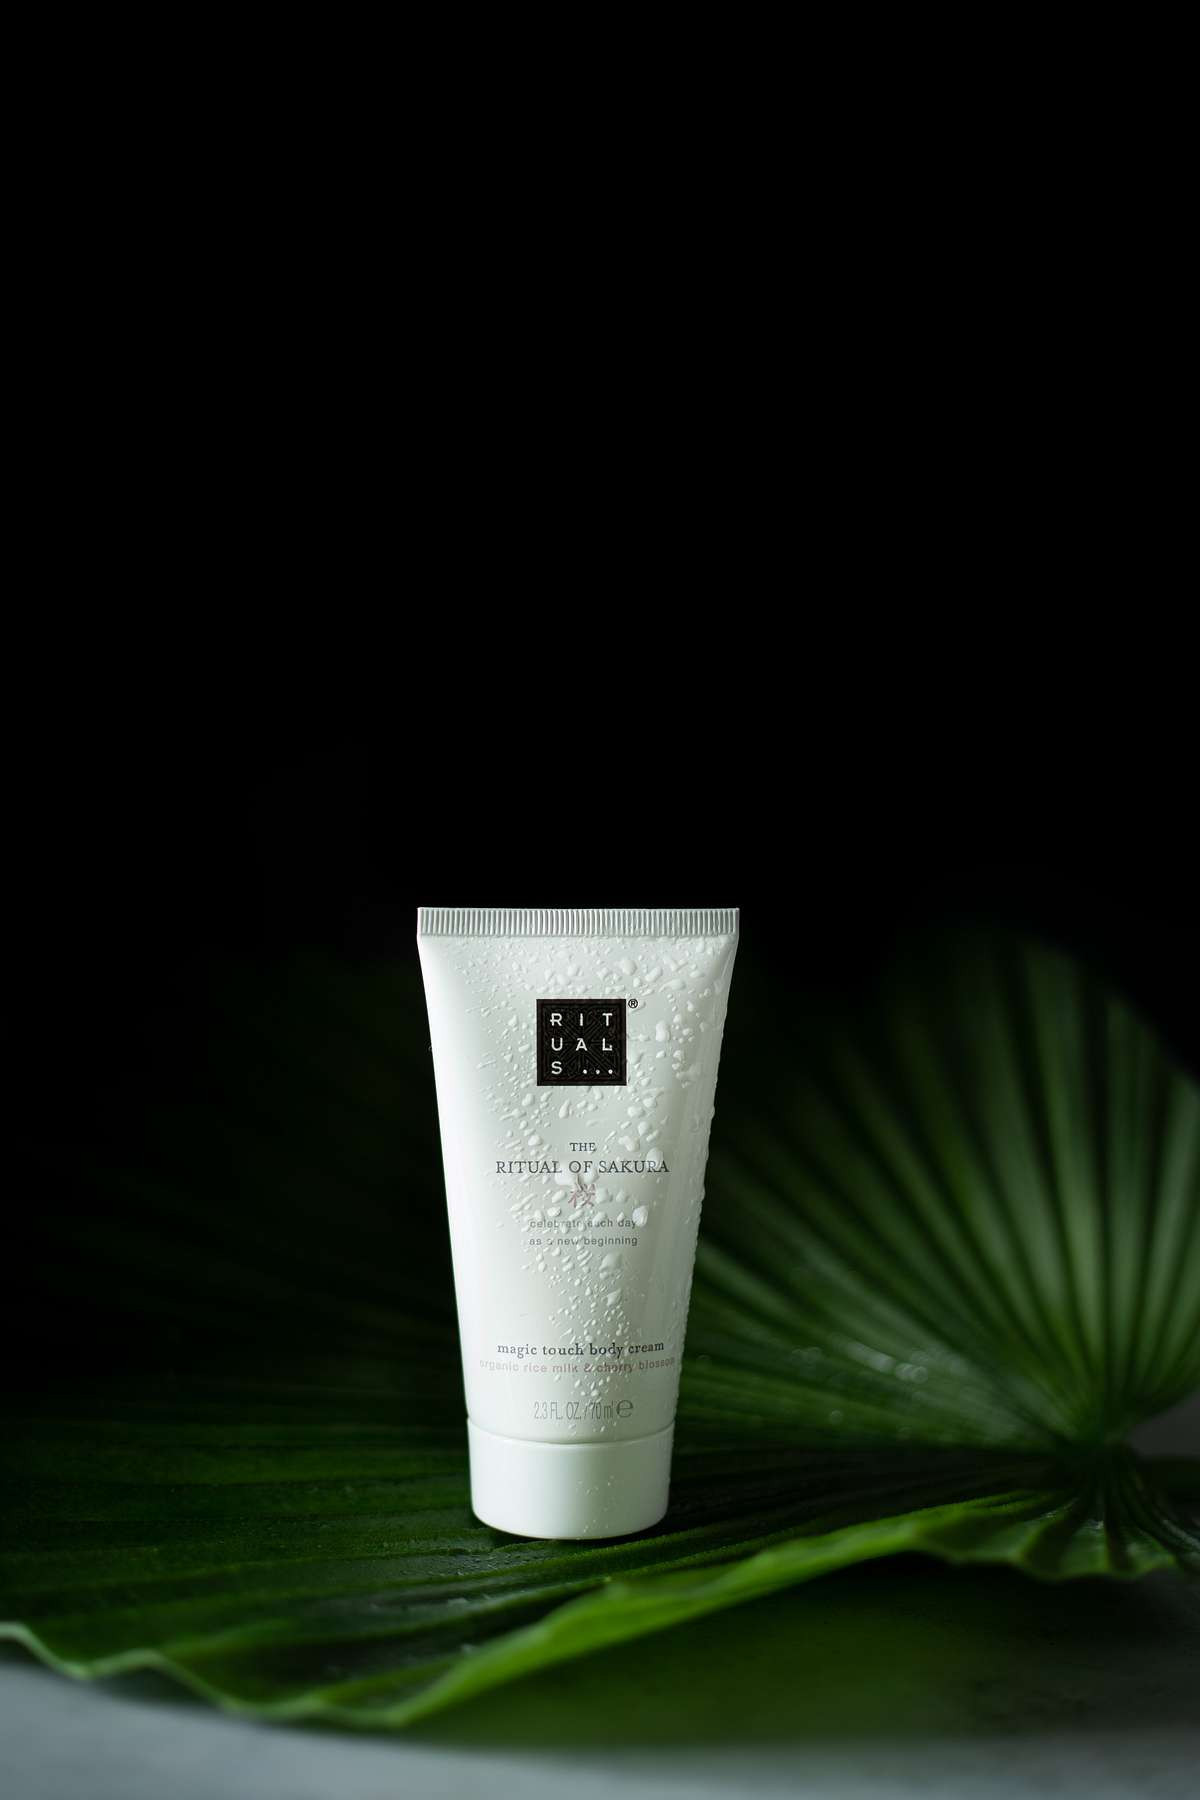 White bottle of body cream with a professional tropical background